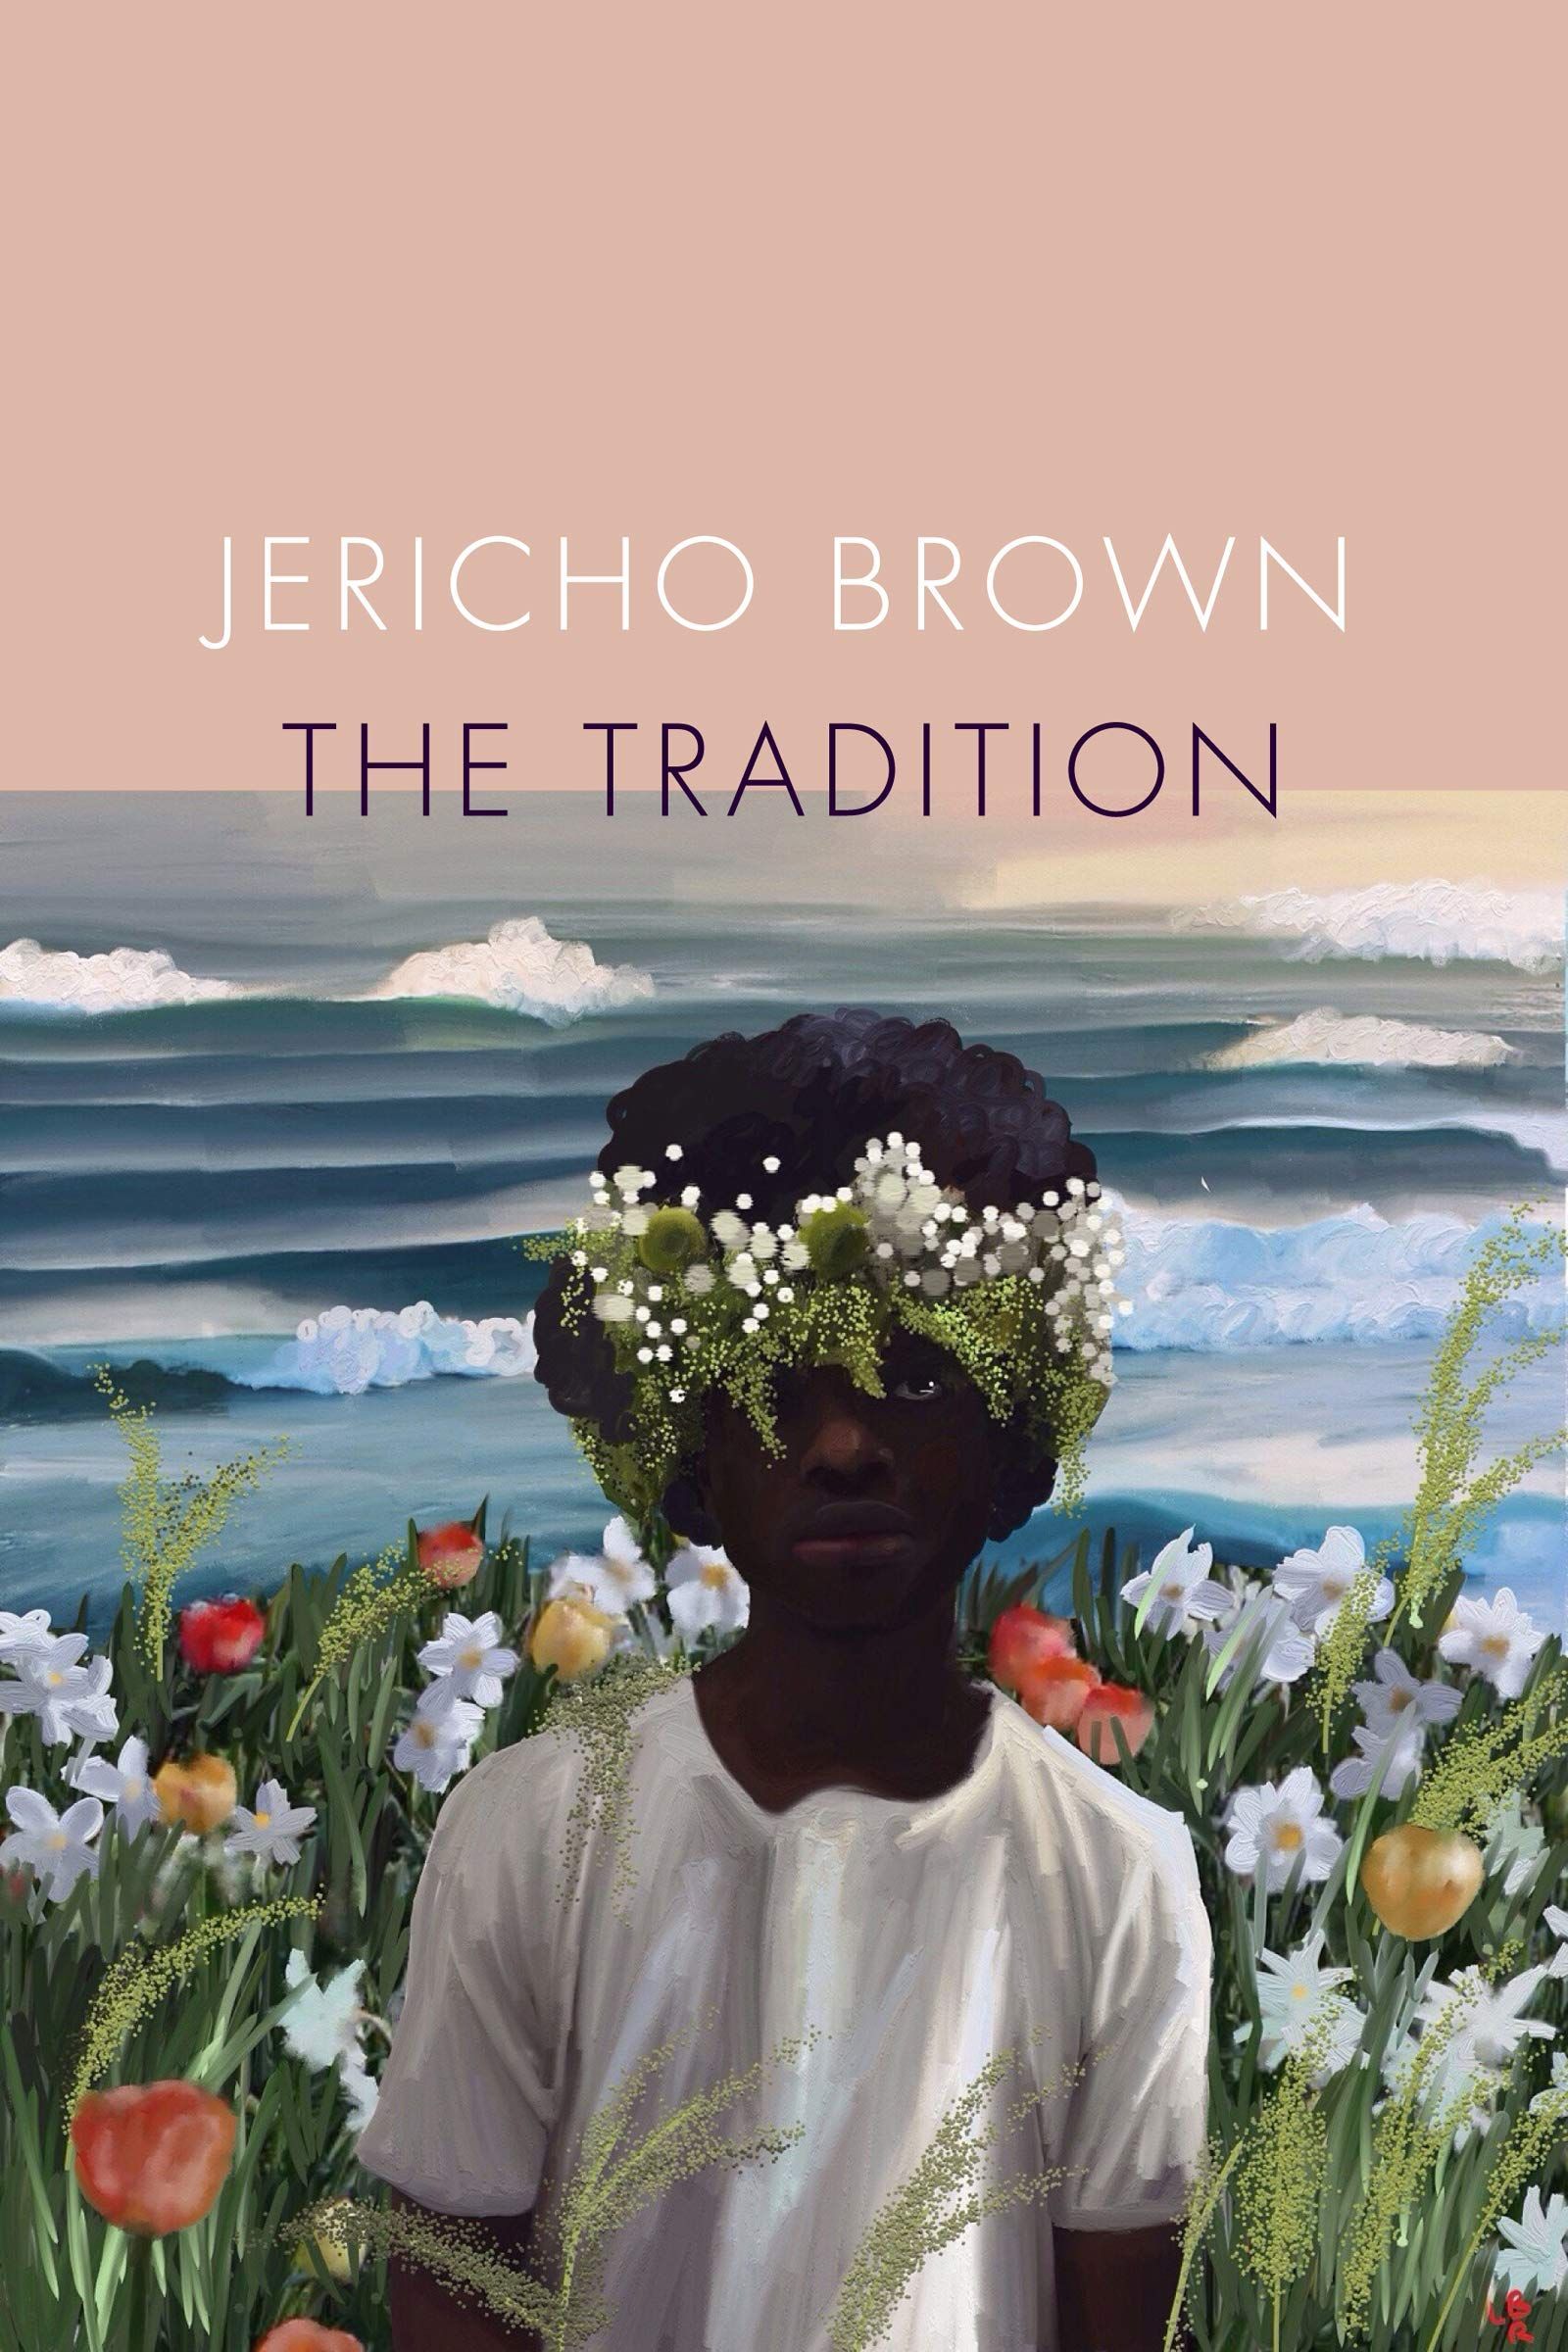 Love and Death: On Jericho Brown’s “The Tradition”